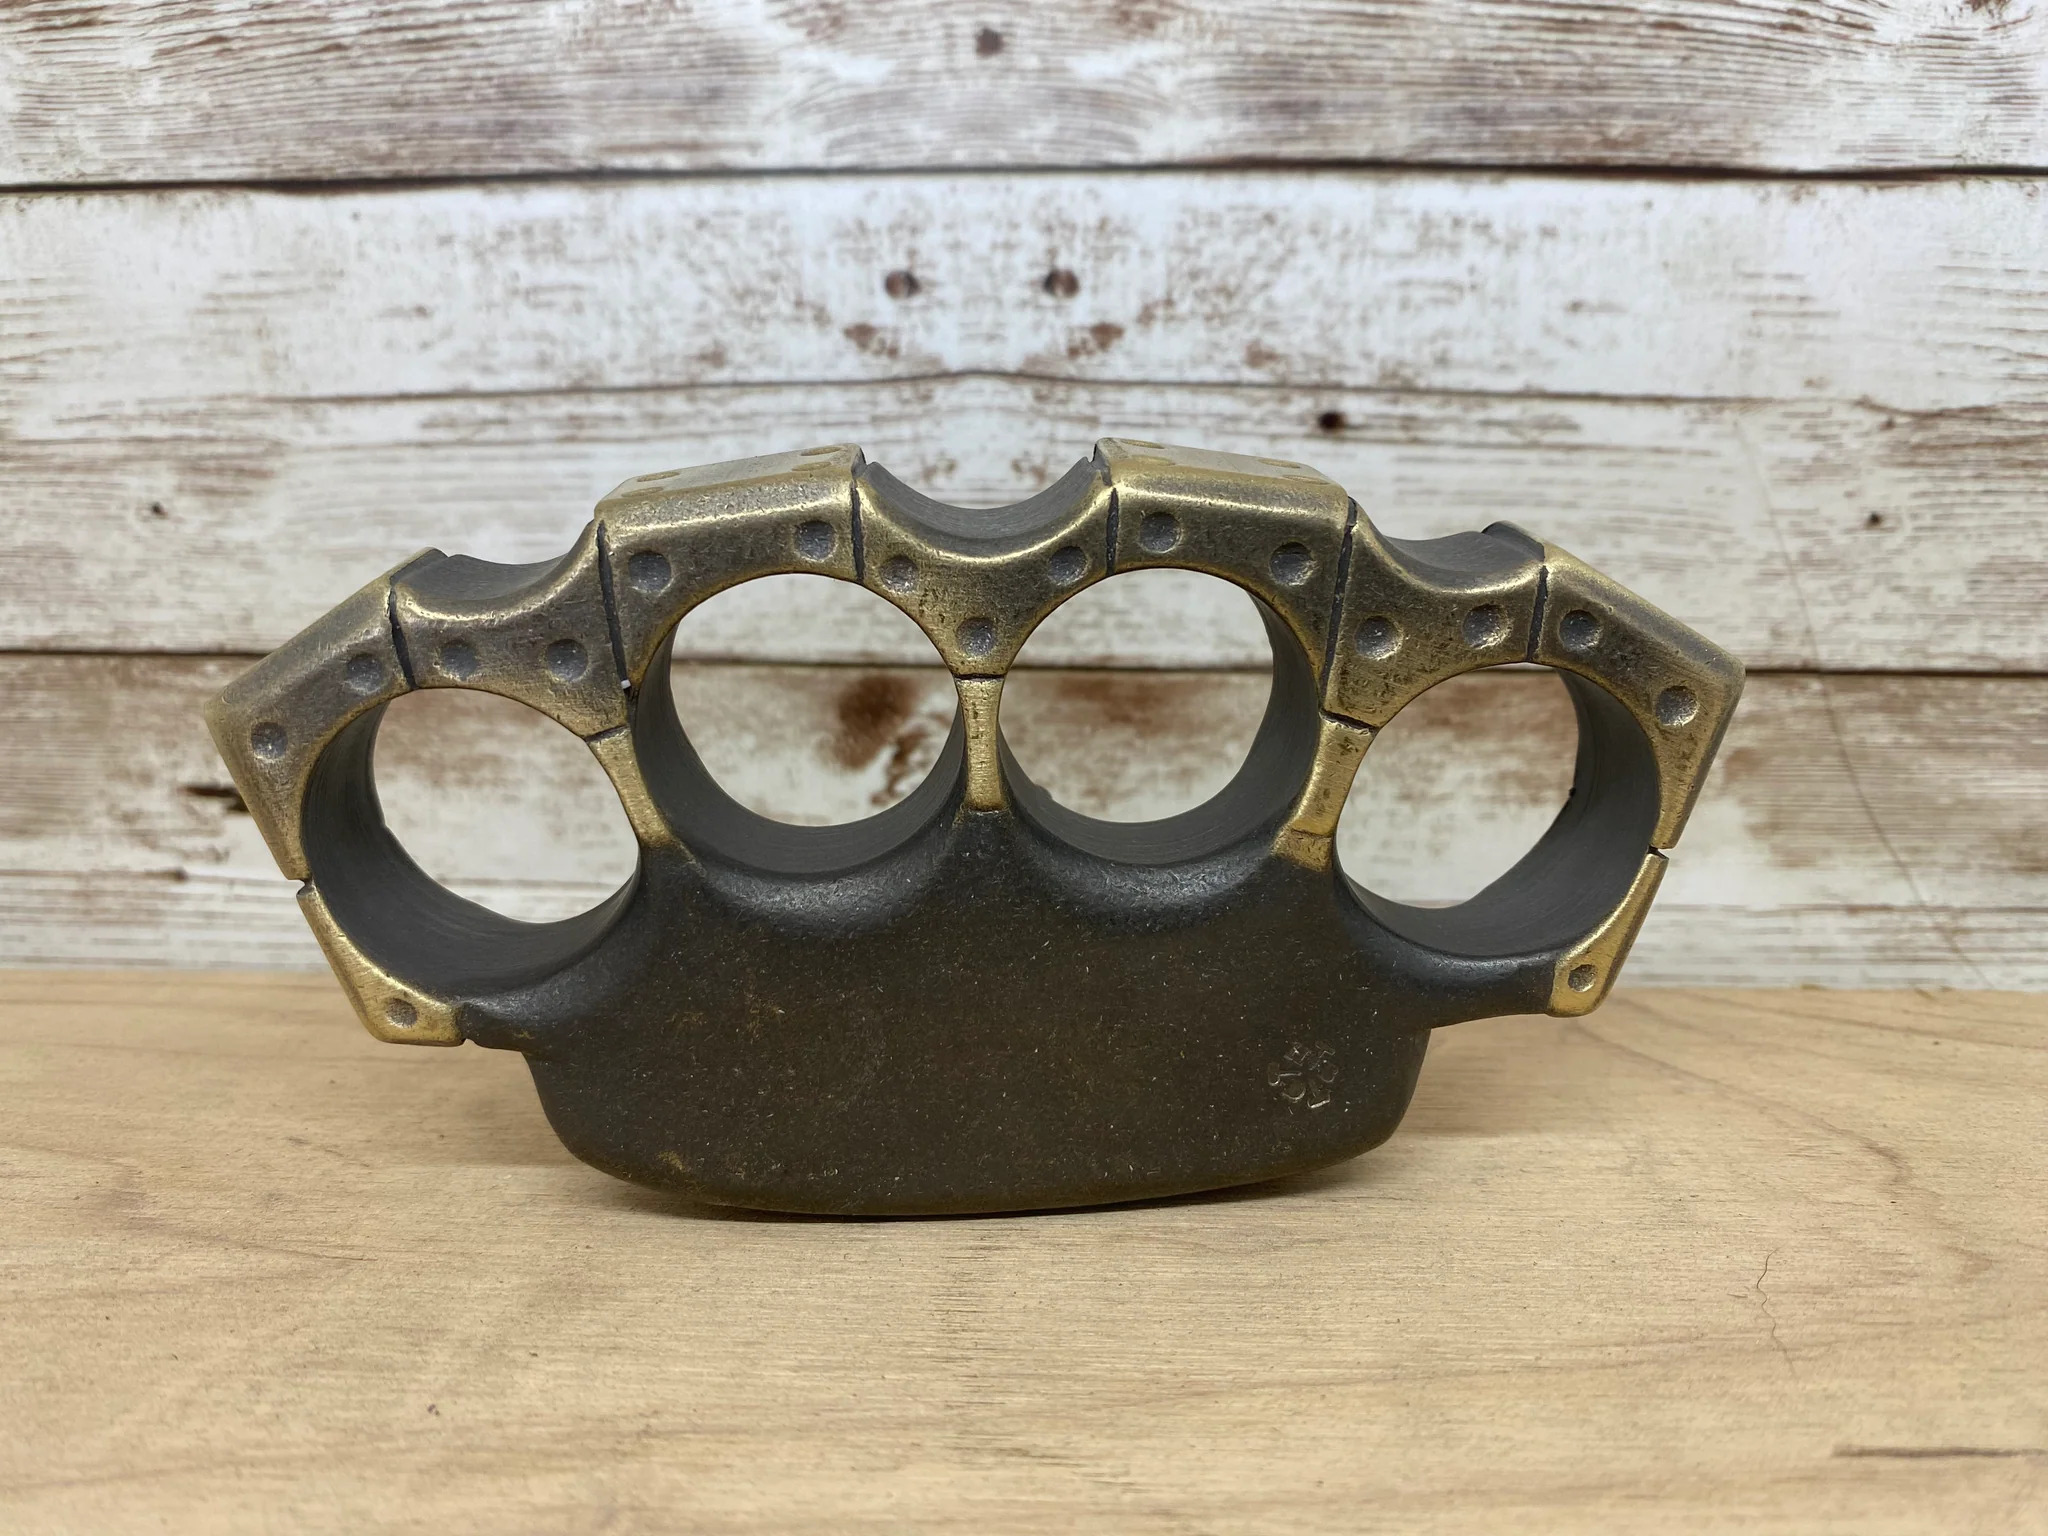 Are brass or carbon fiber knuckle dusters better in your opinion